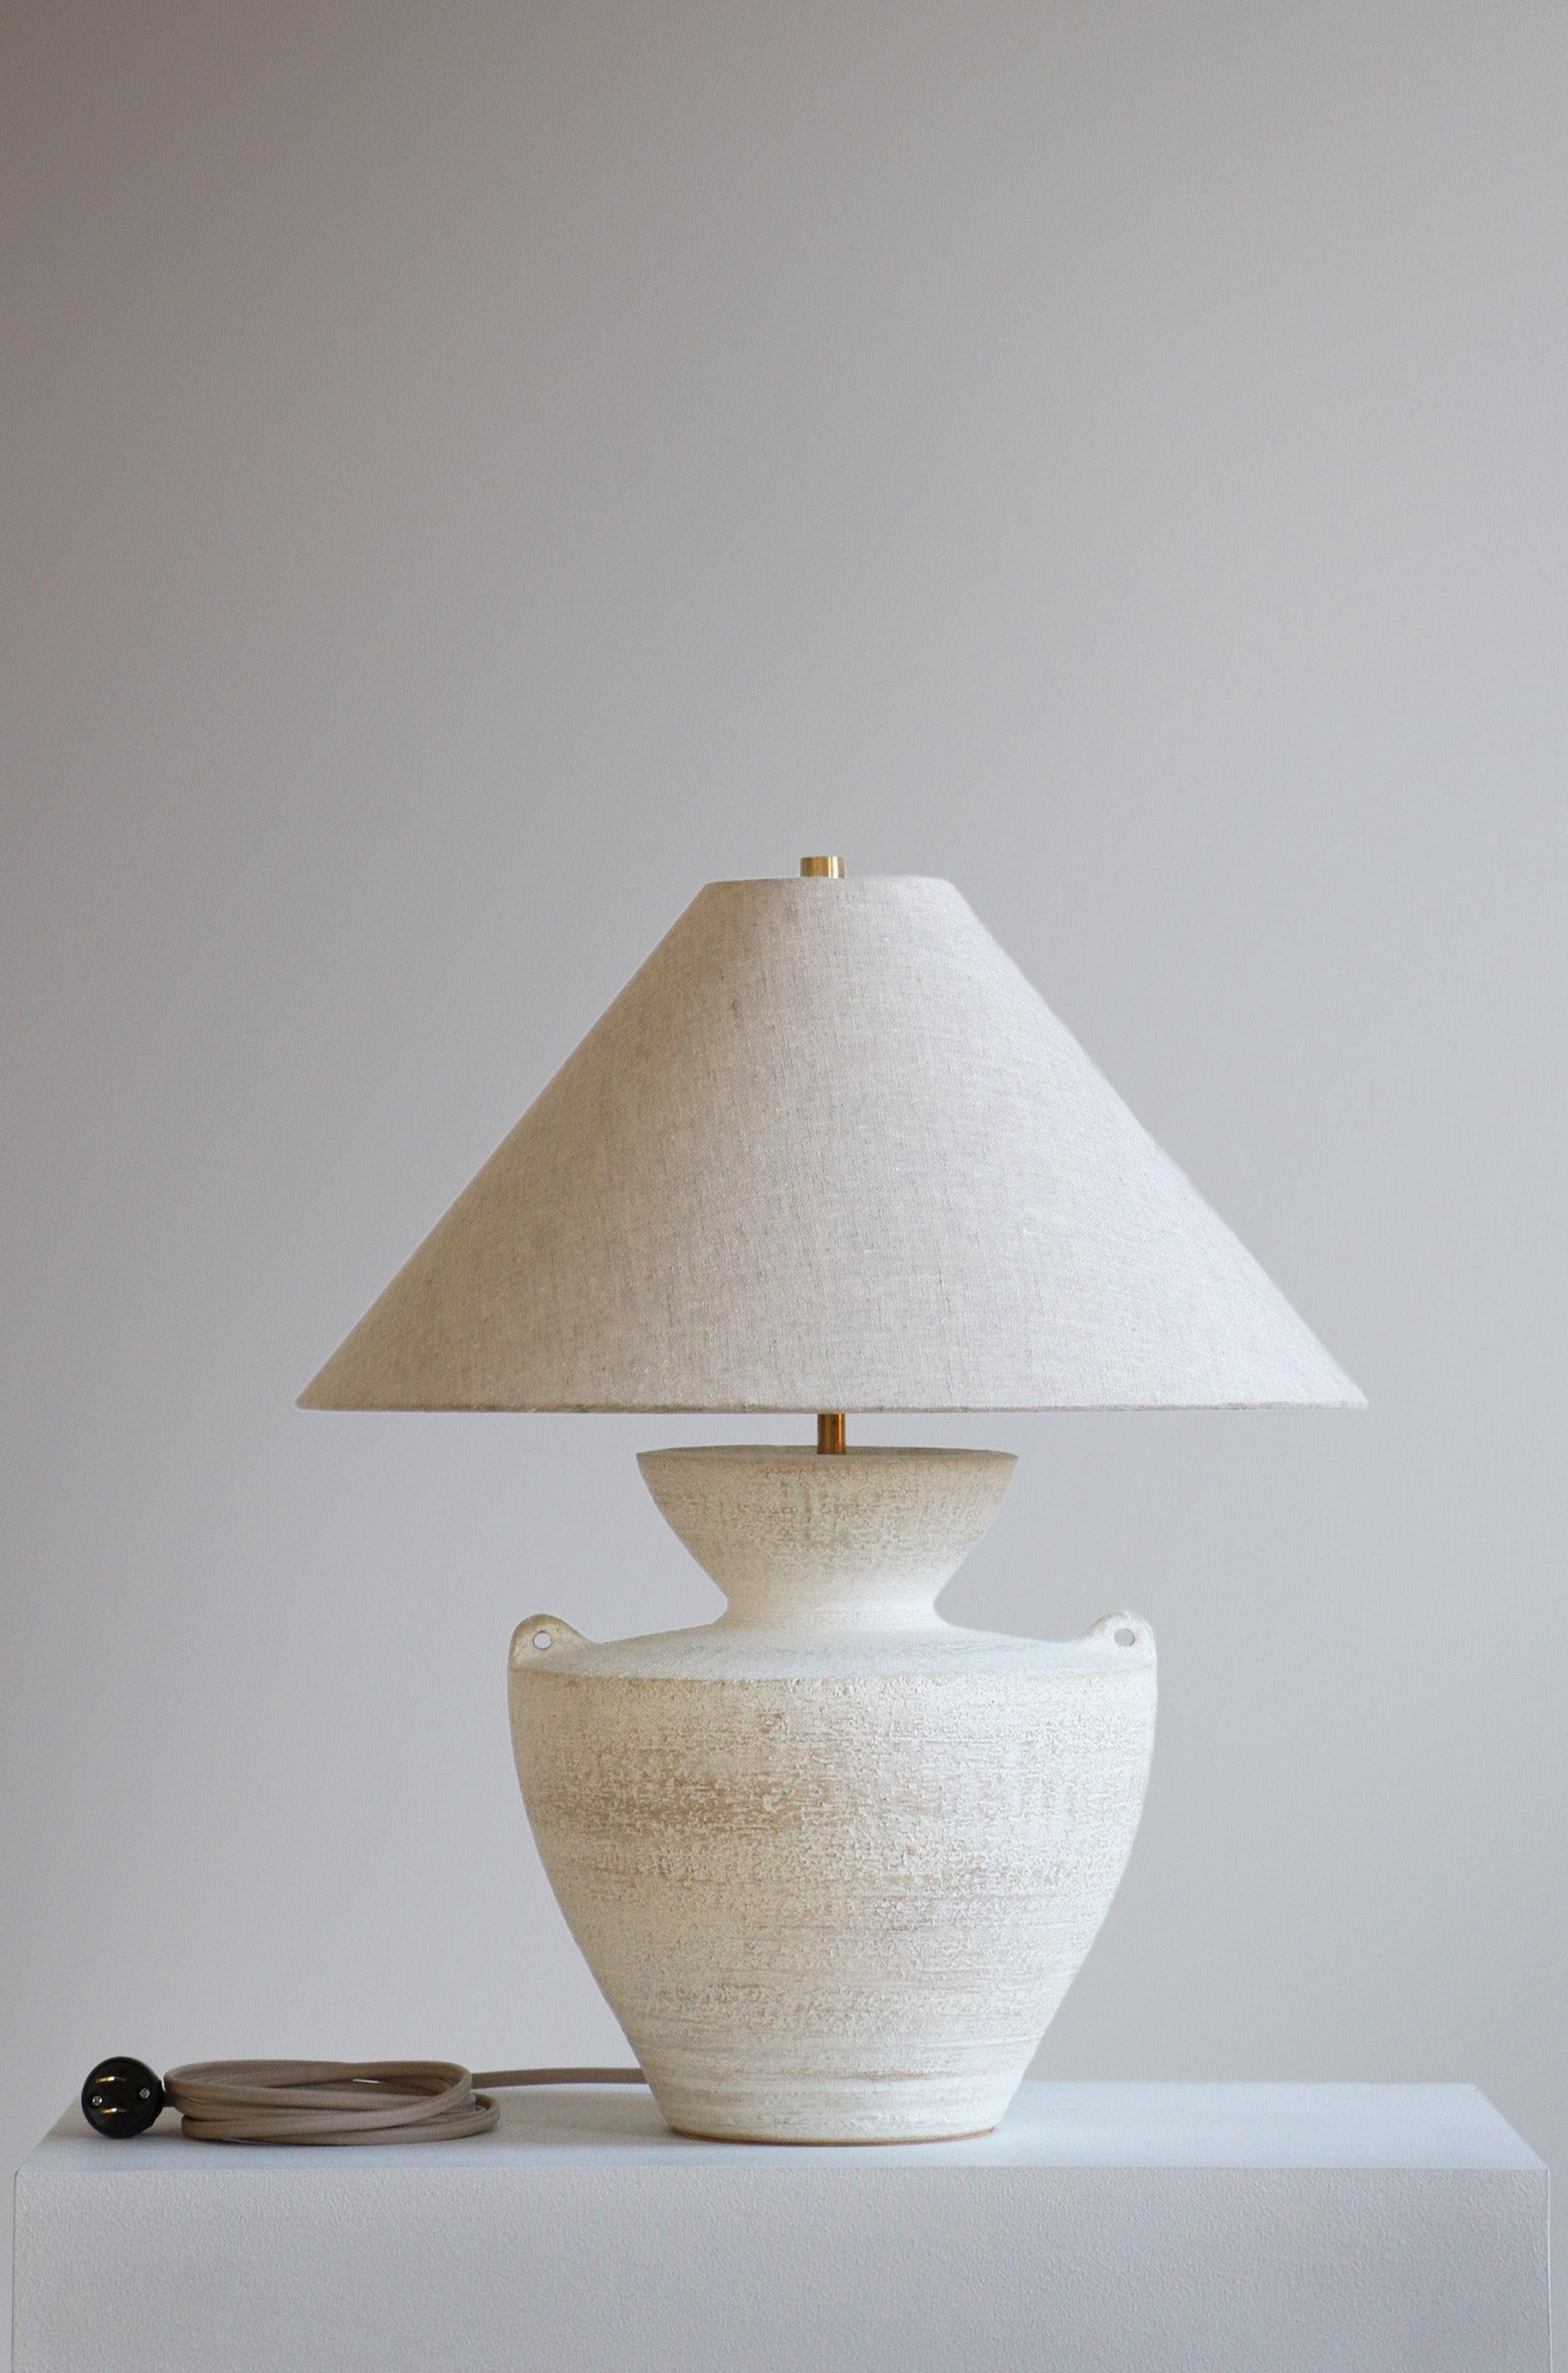 Atlas Lamp in Terrasig with Oatmeal linen shade